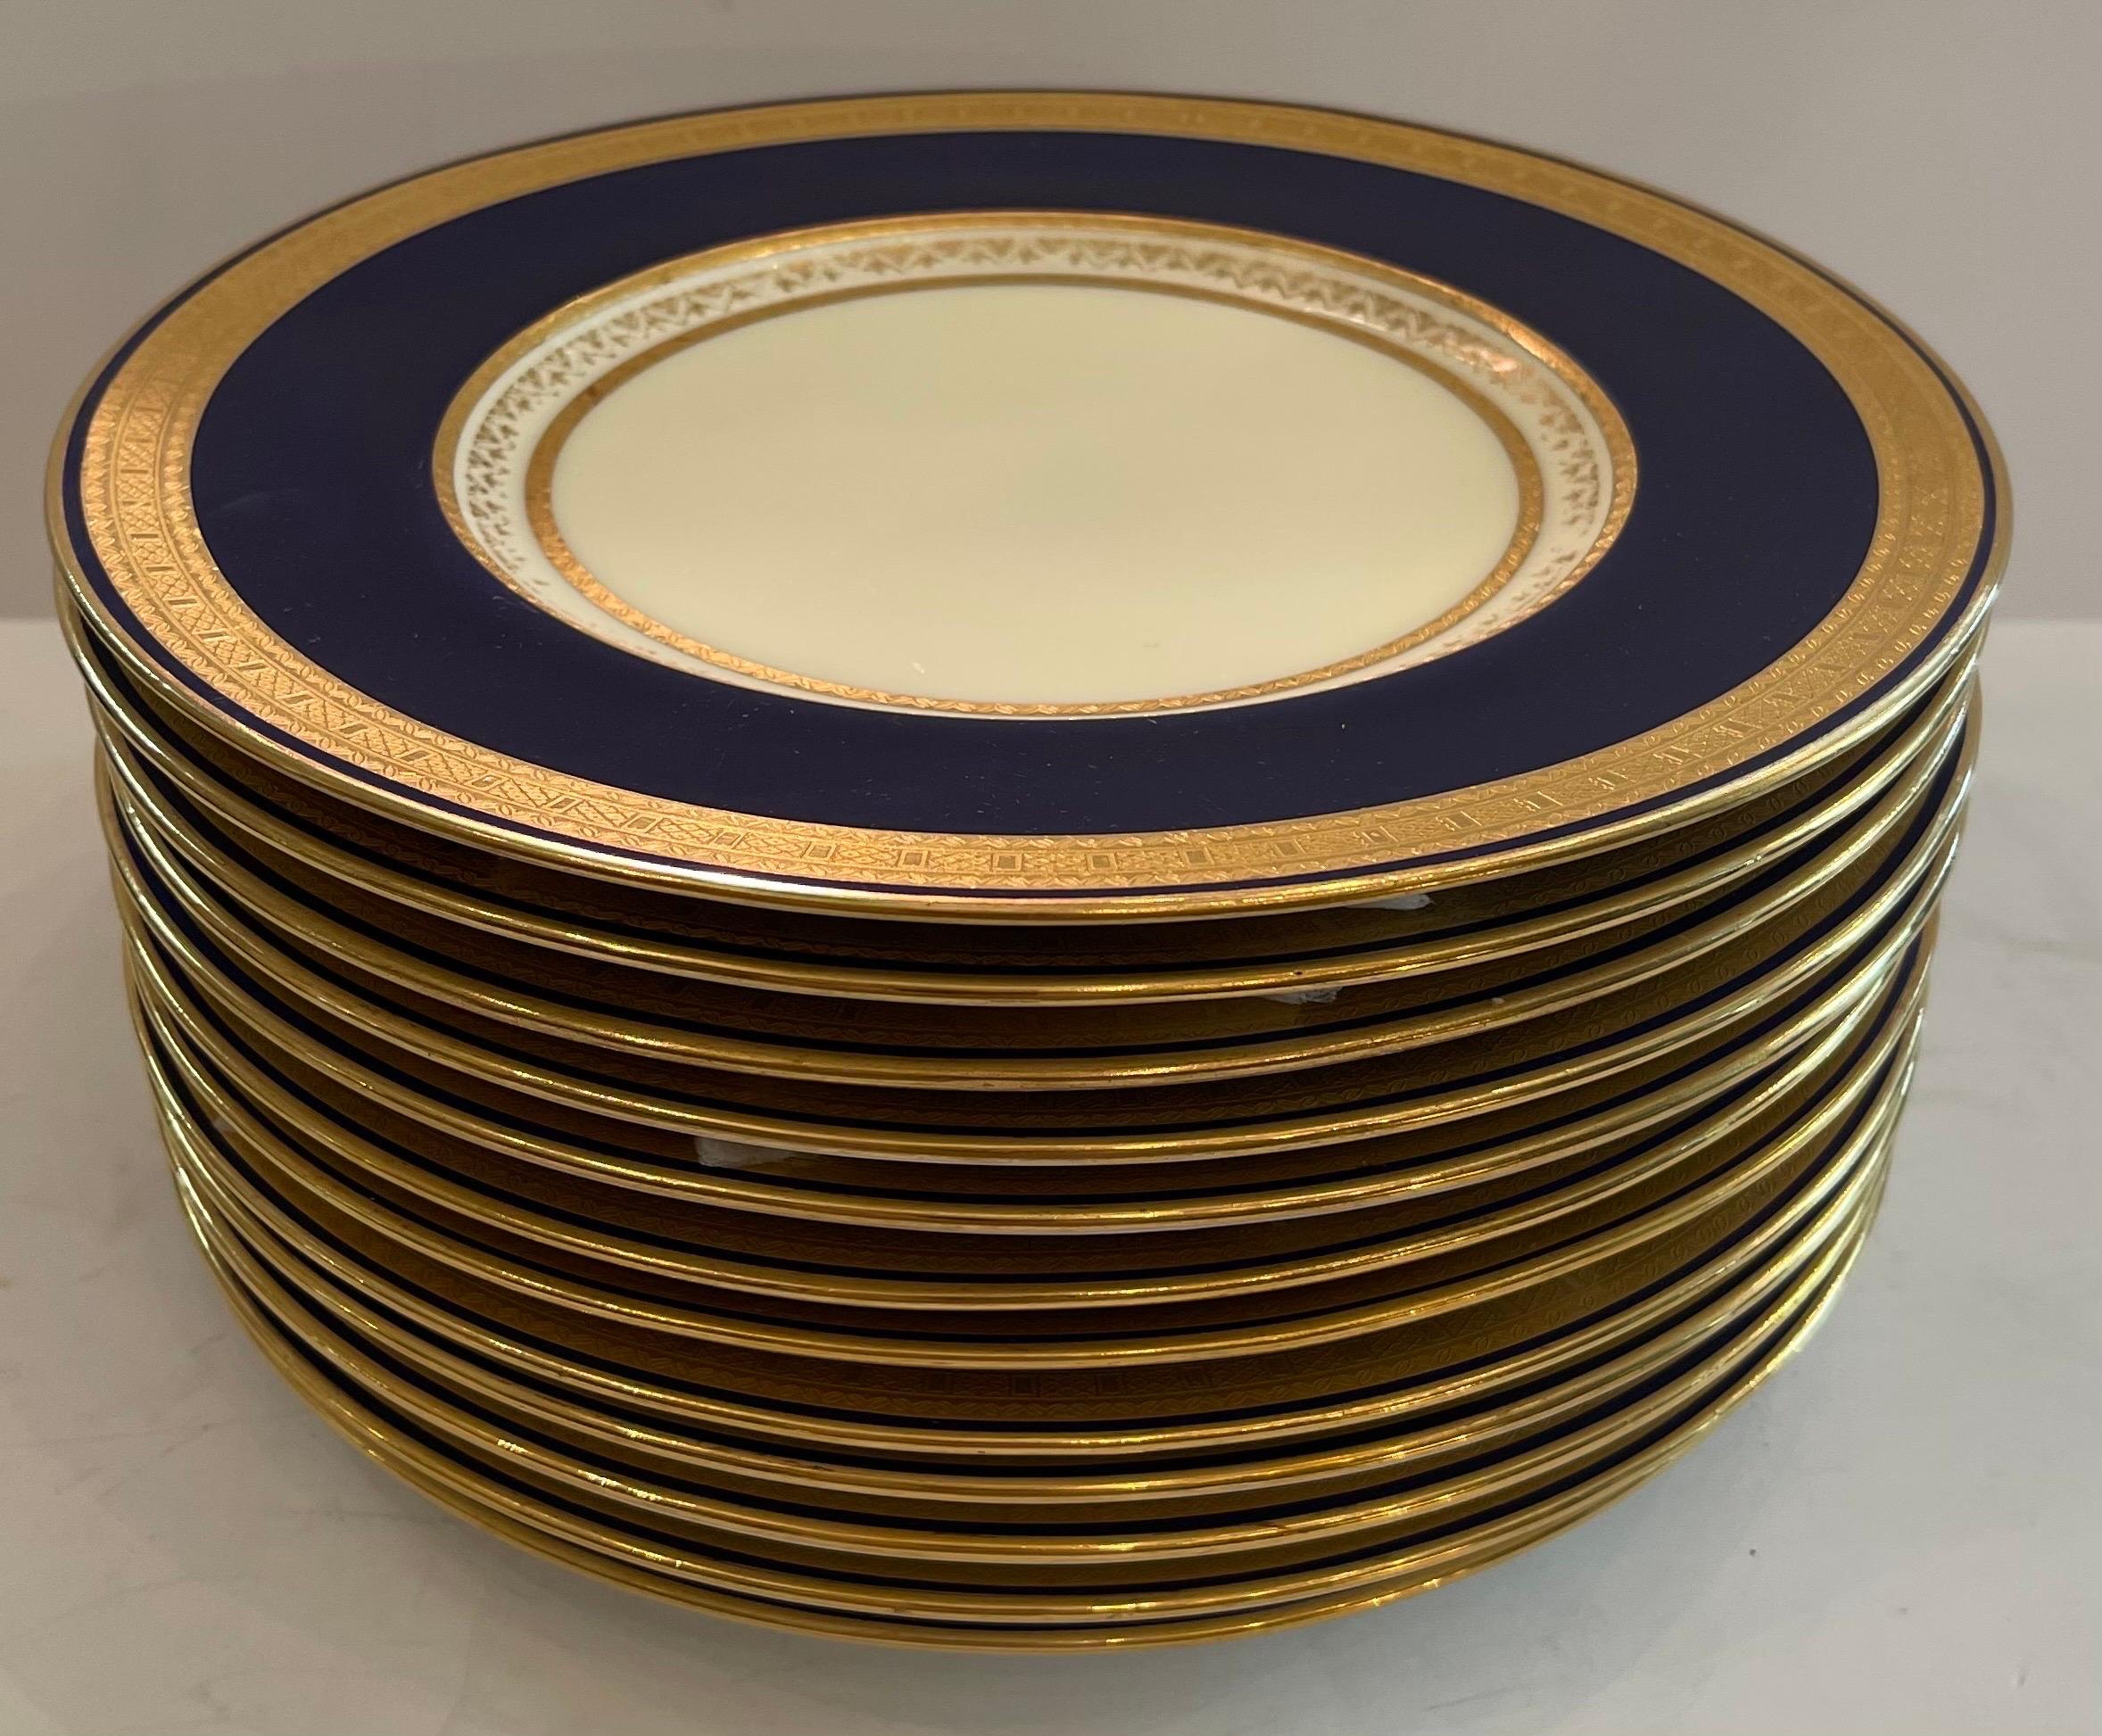 A wonderful classic and elegant set of 12 Minton England bone china dinner plates. This set features a nice deep collar of cobalt blue that is bordered by raised gold on the interior and outer rim. Made of  white porcelain, these plates are in very